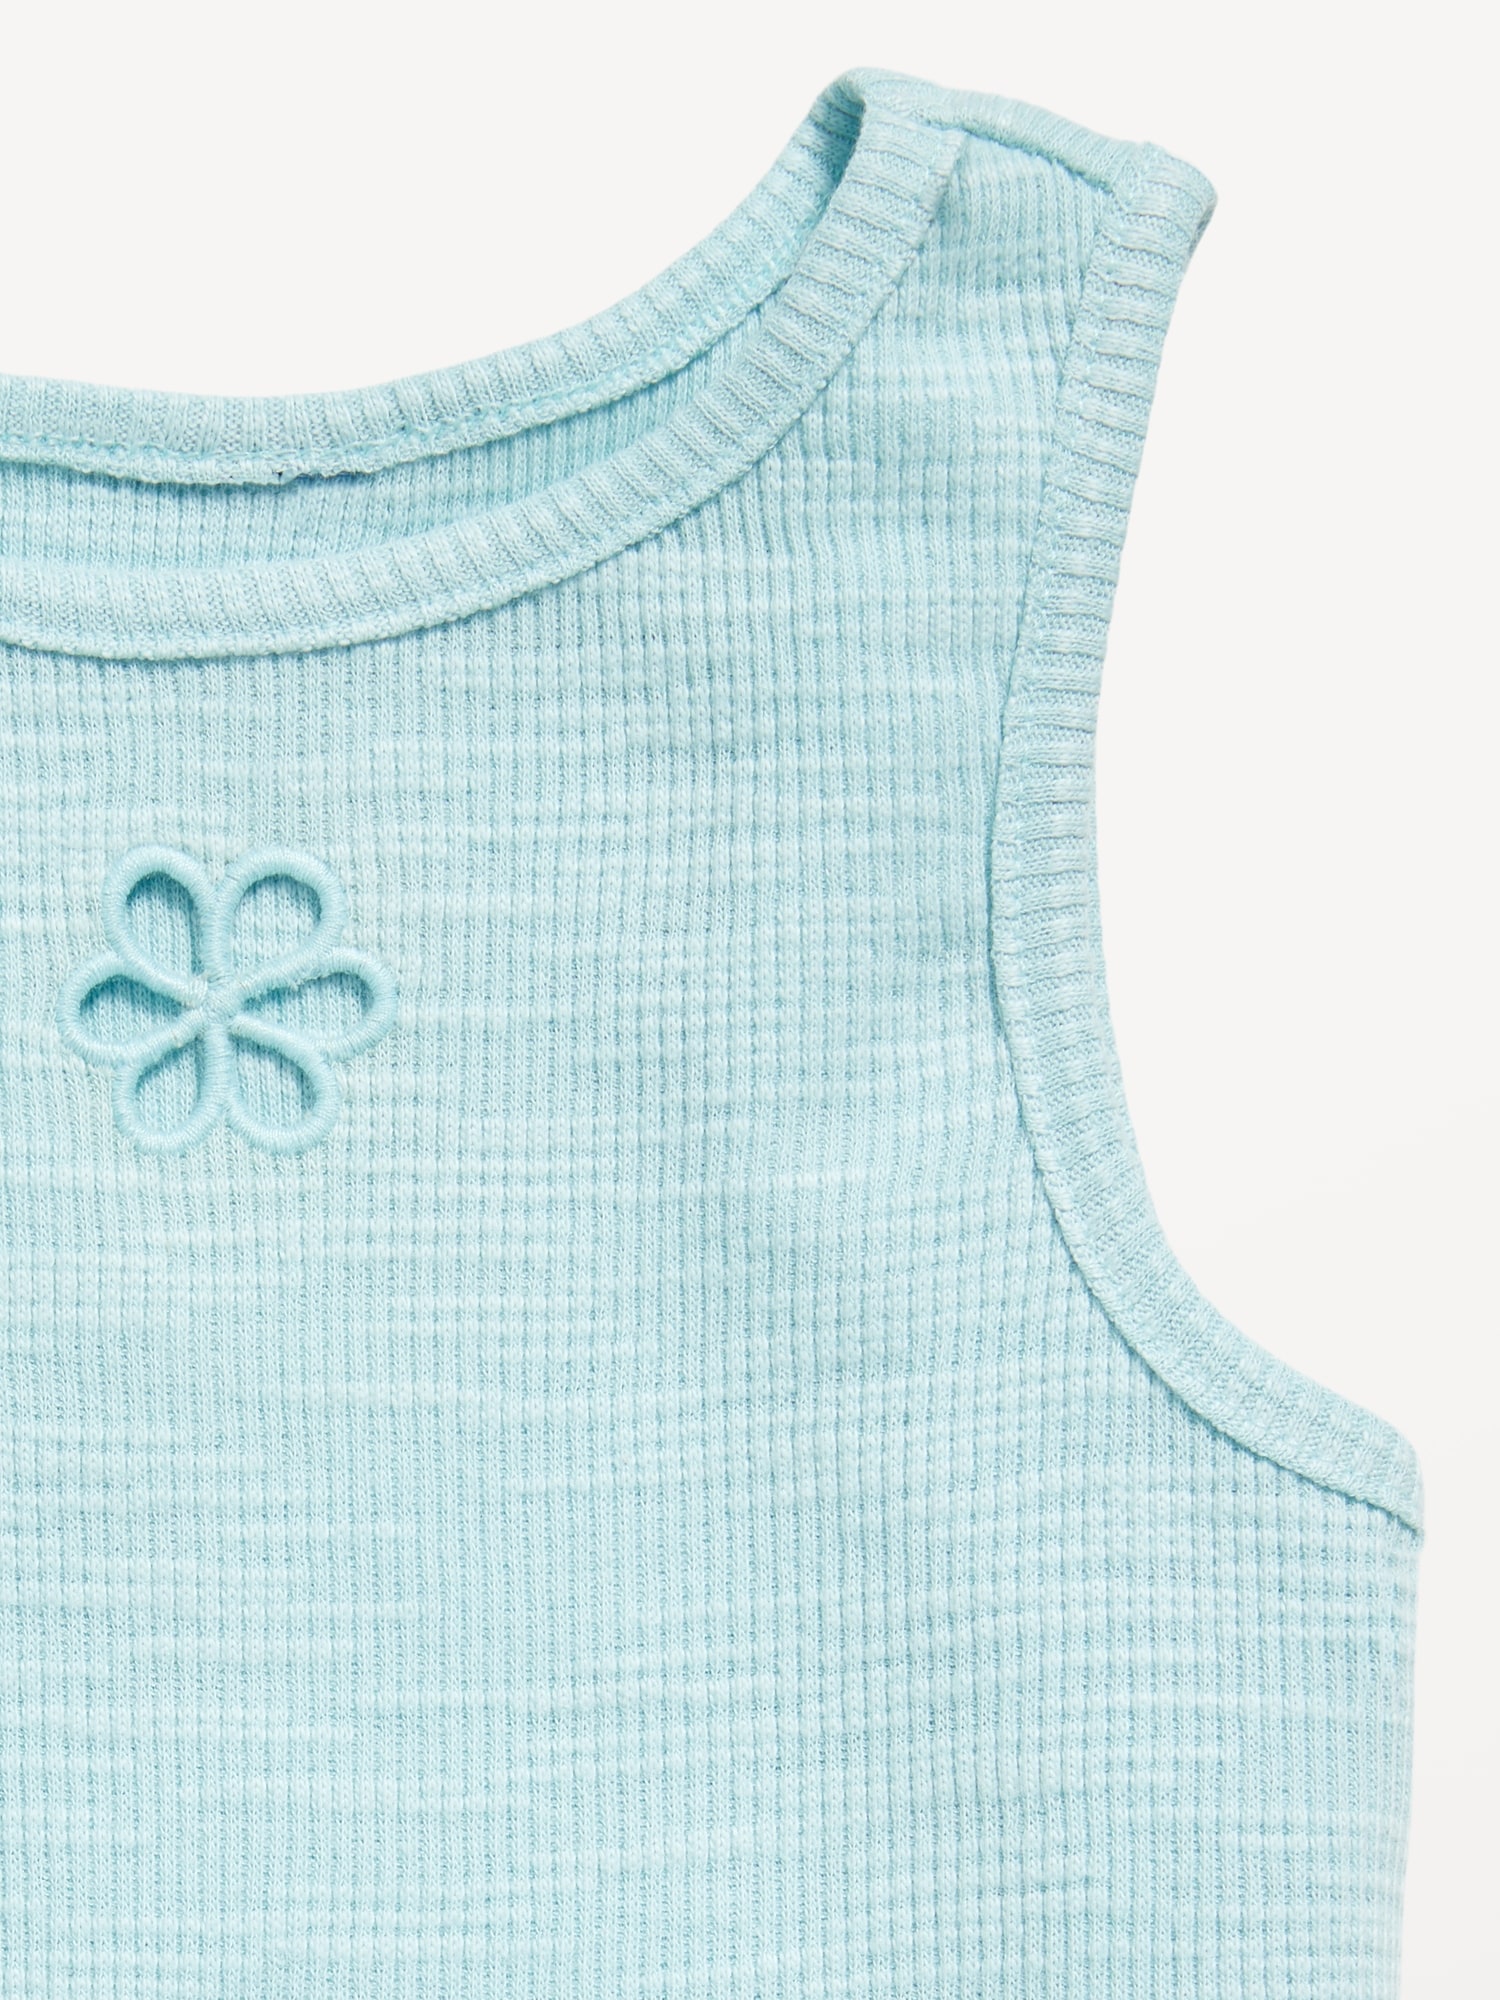 Cutout-Graphic Tank Top for Girls